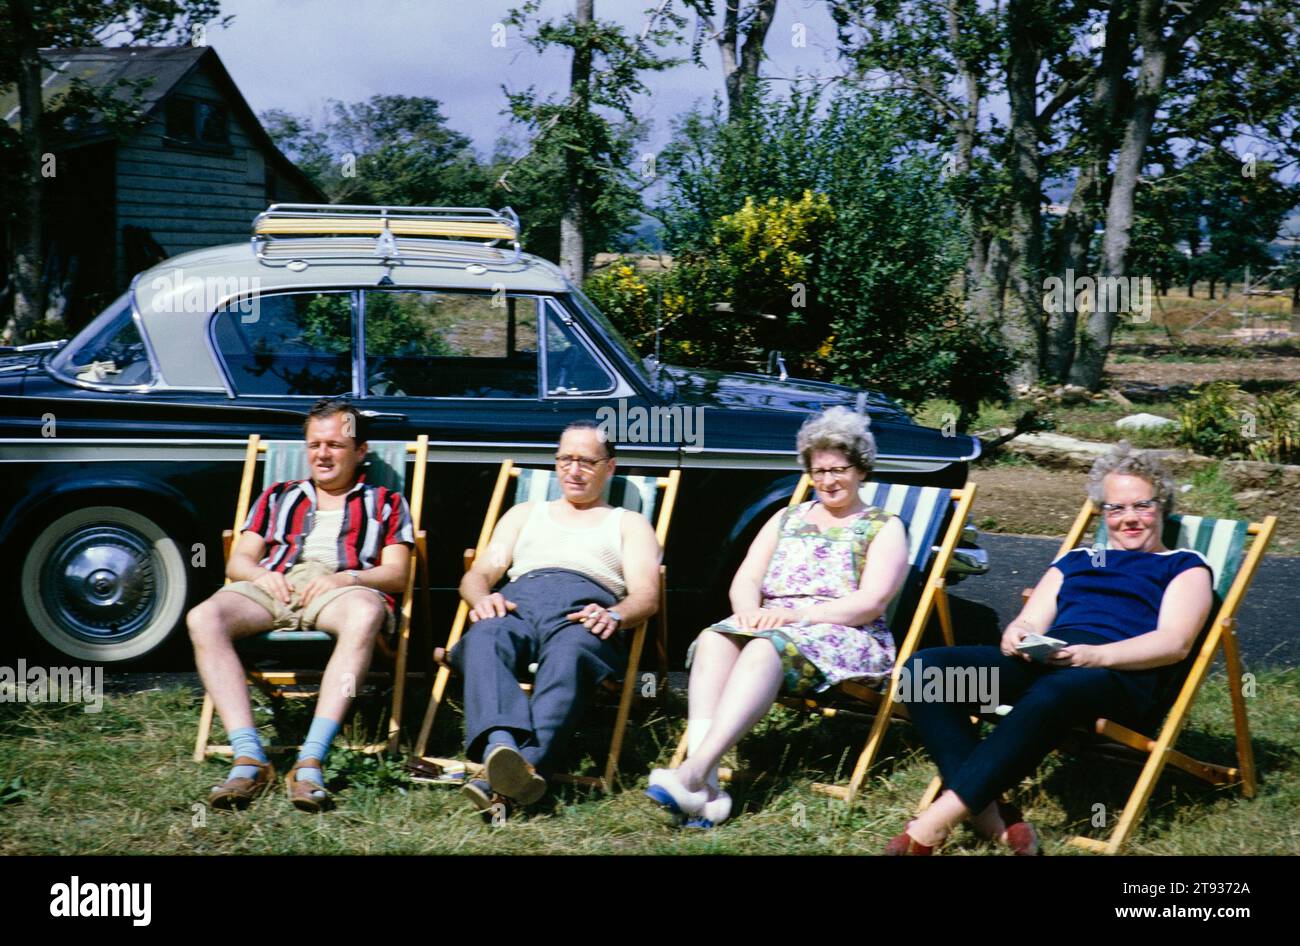 Two couples sitting in deckchairs next to a car on summer holiday, England, UK 1962 Stock Photo